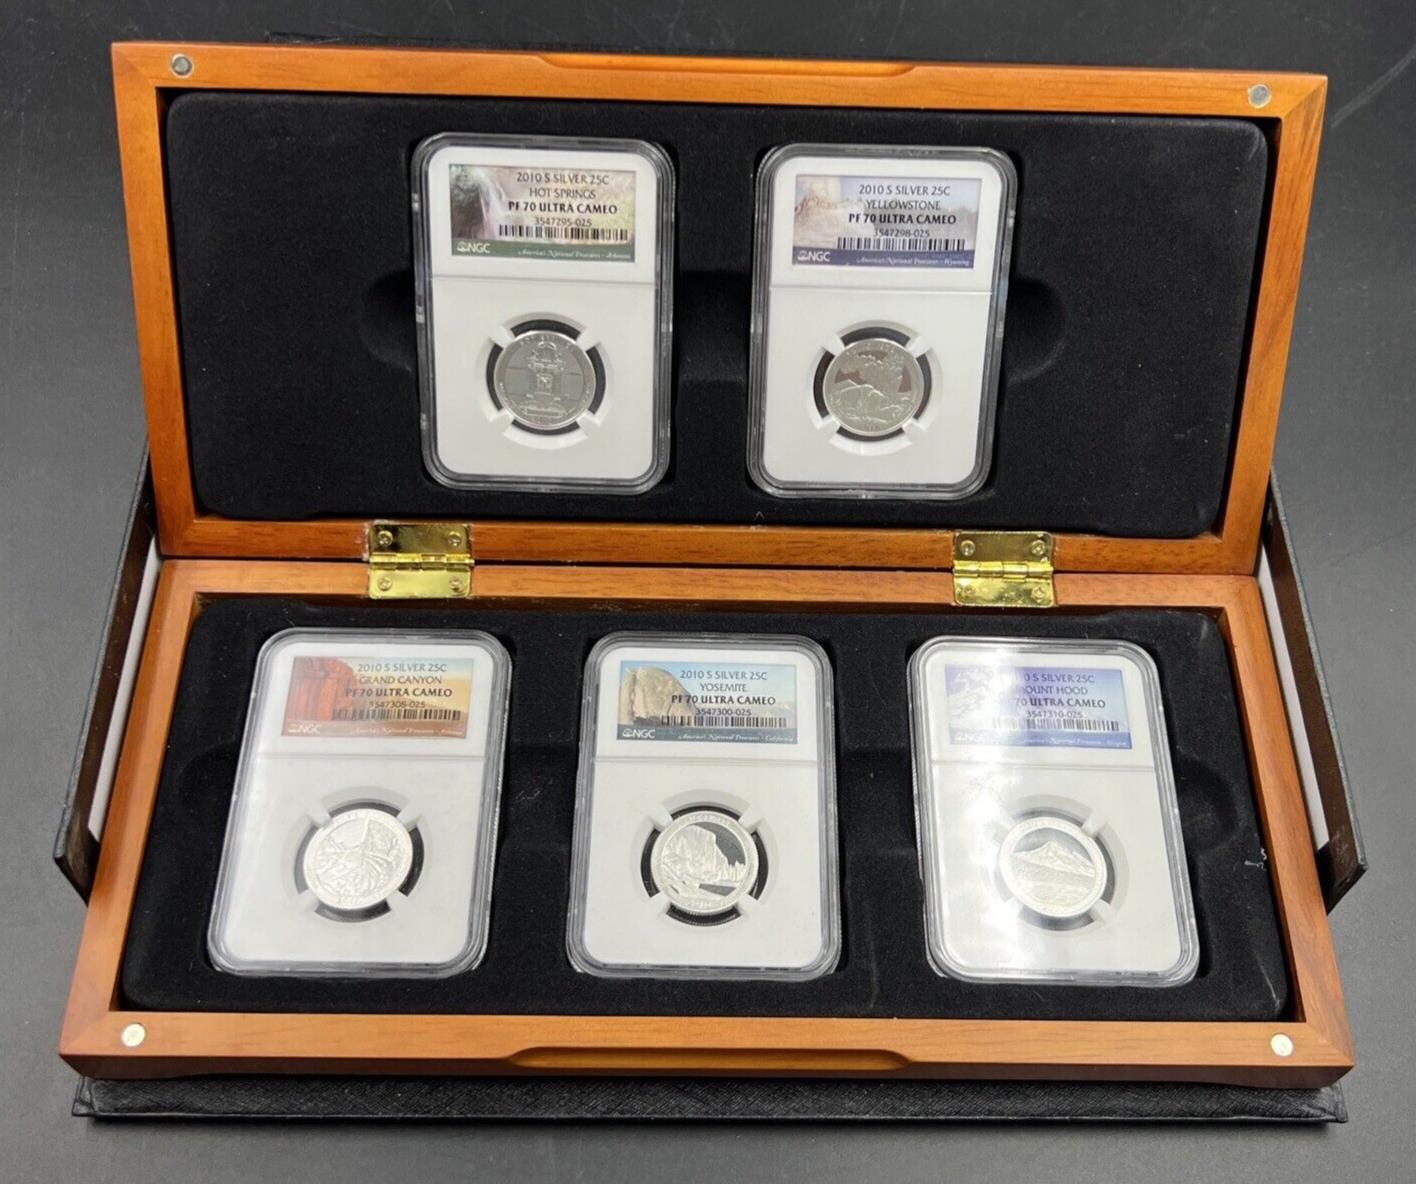 5 Coin NGC PF70 Silver 2010 25c ATB America Beautiful Complete Year Quarter Set